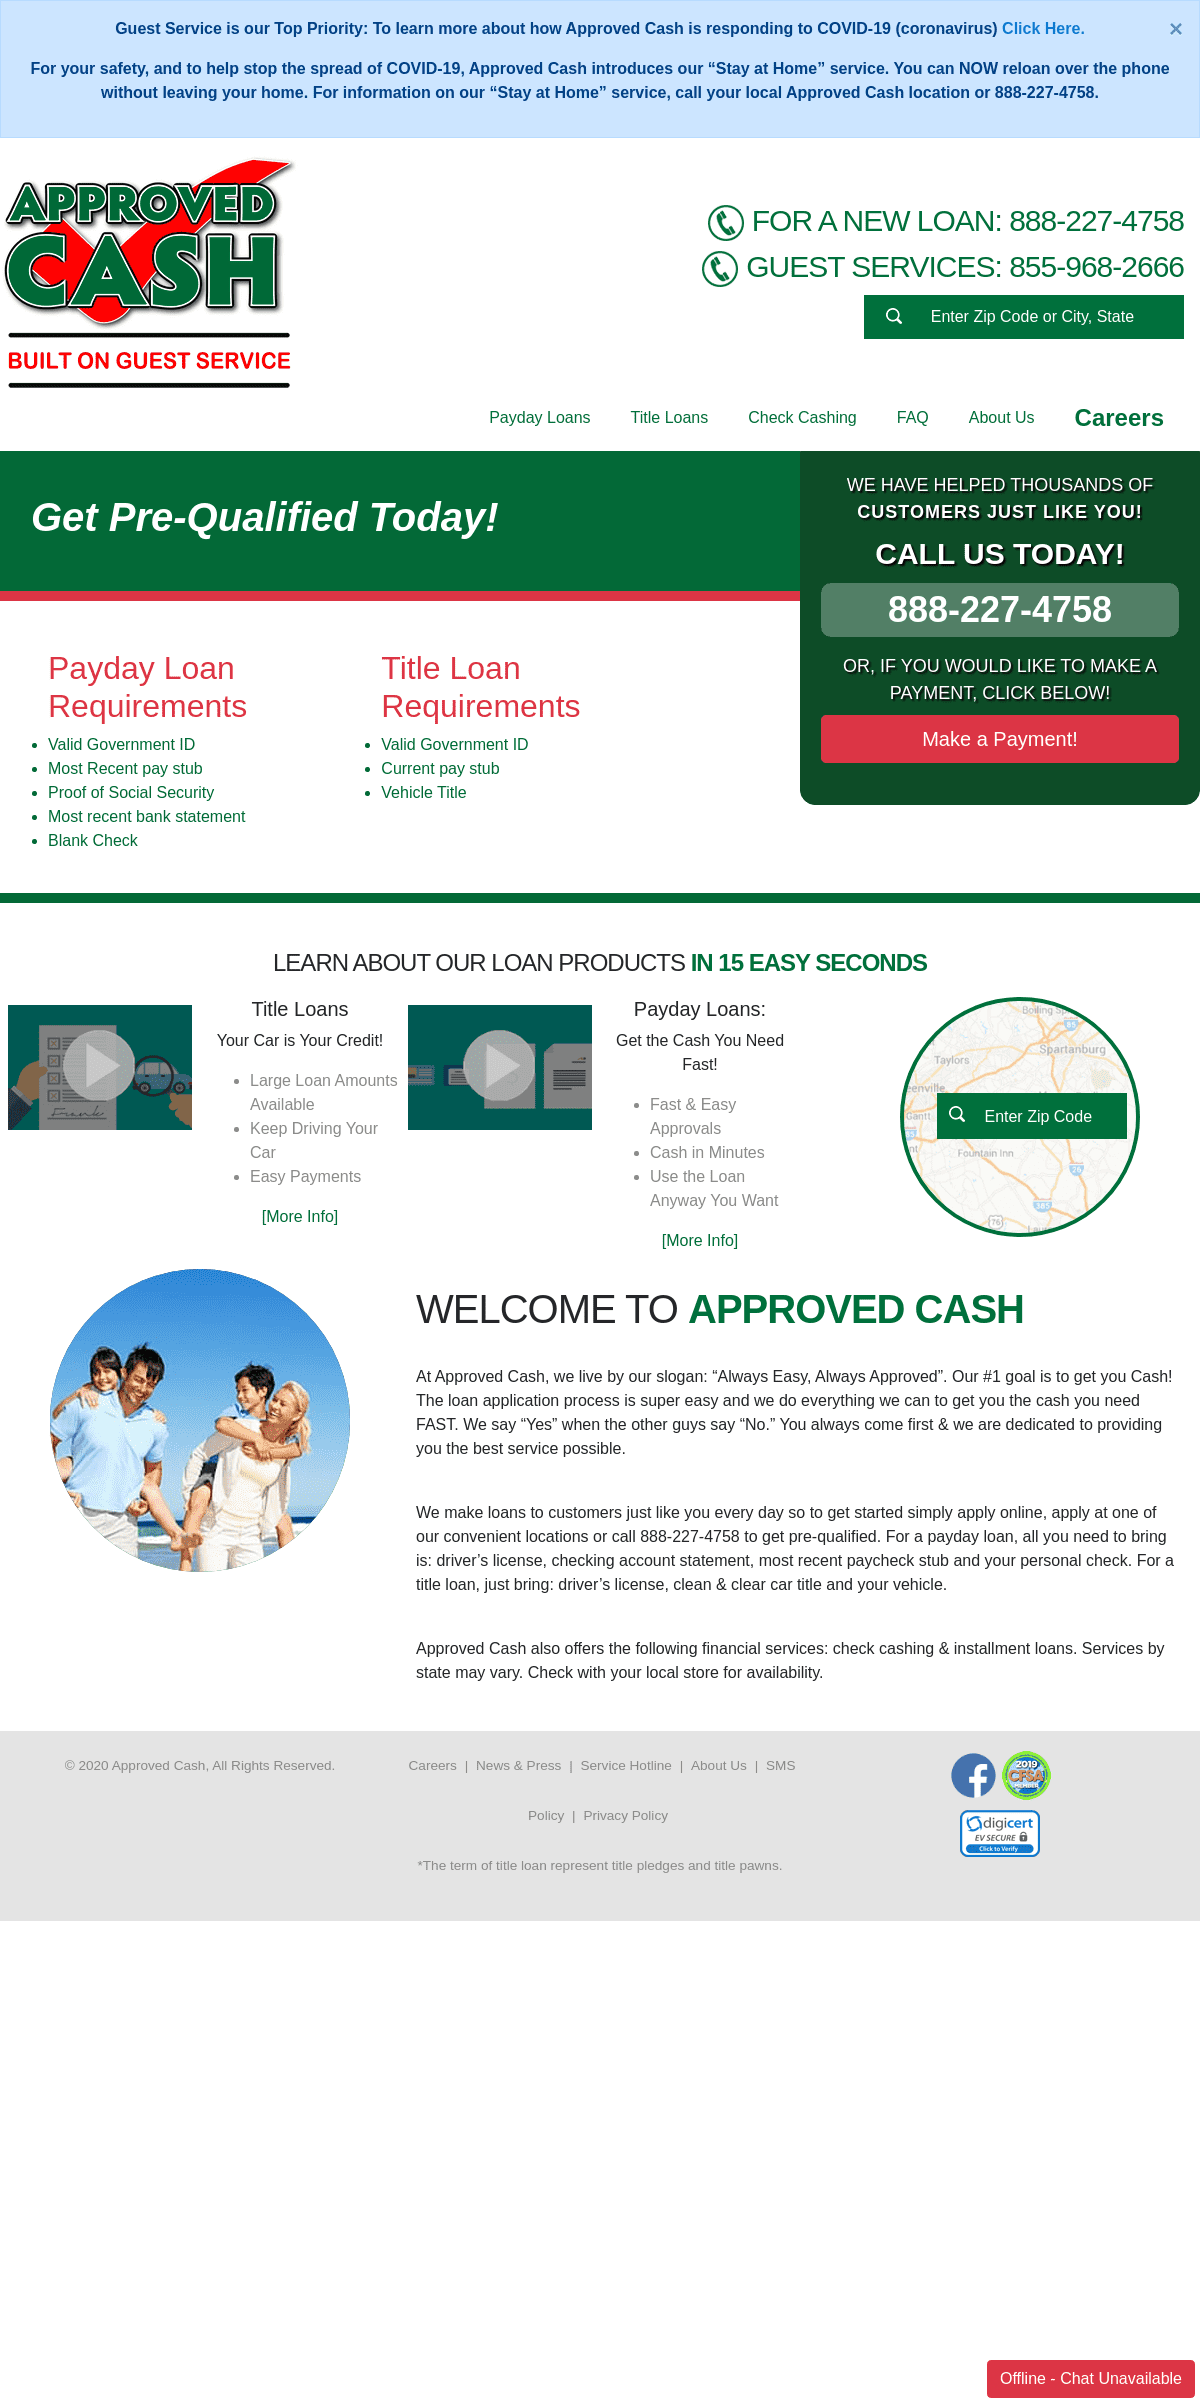 A complete backup of approvedcashadvance.com